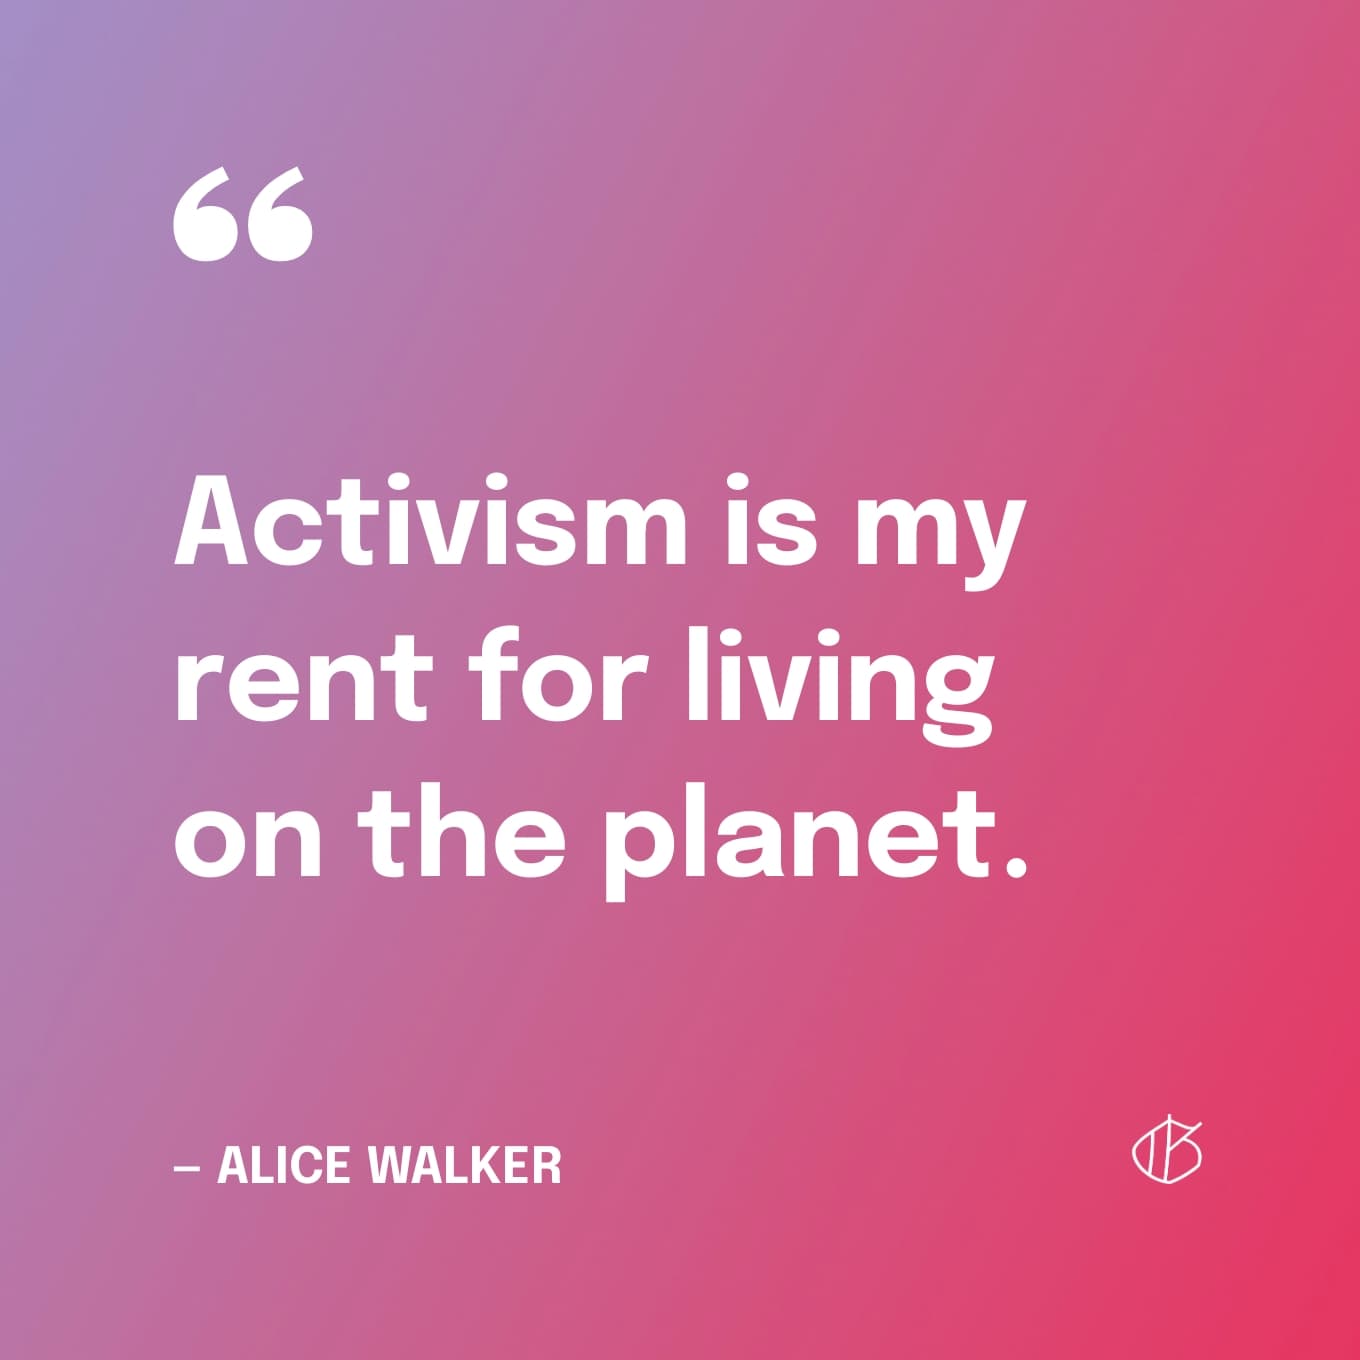 “Activism is my rent for living on the planet.” — Alice Walker